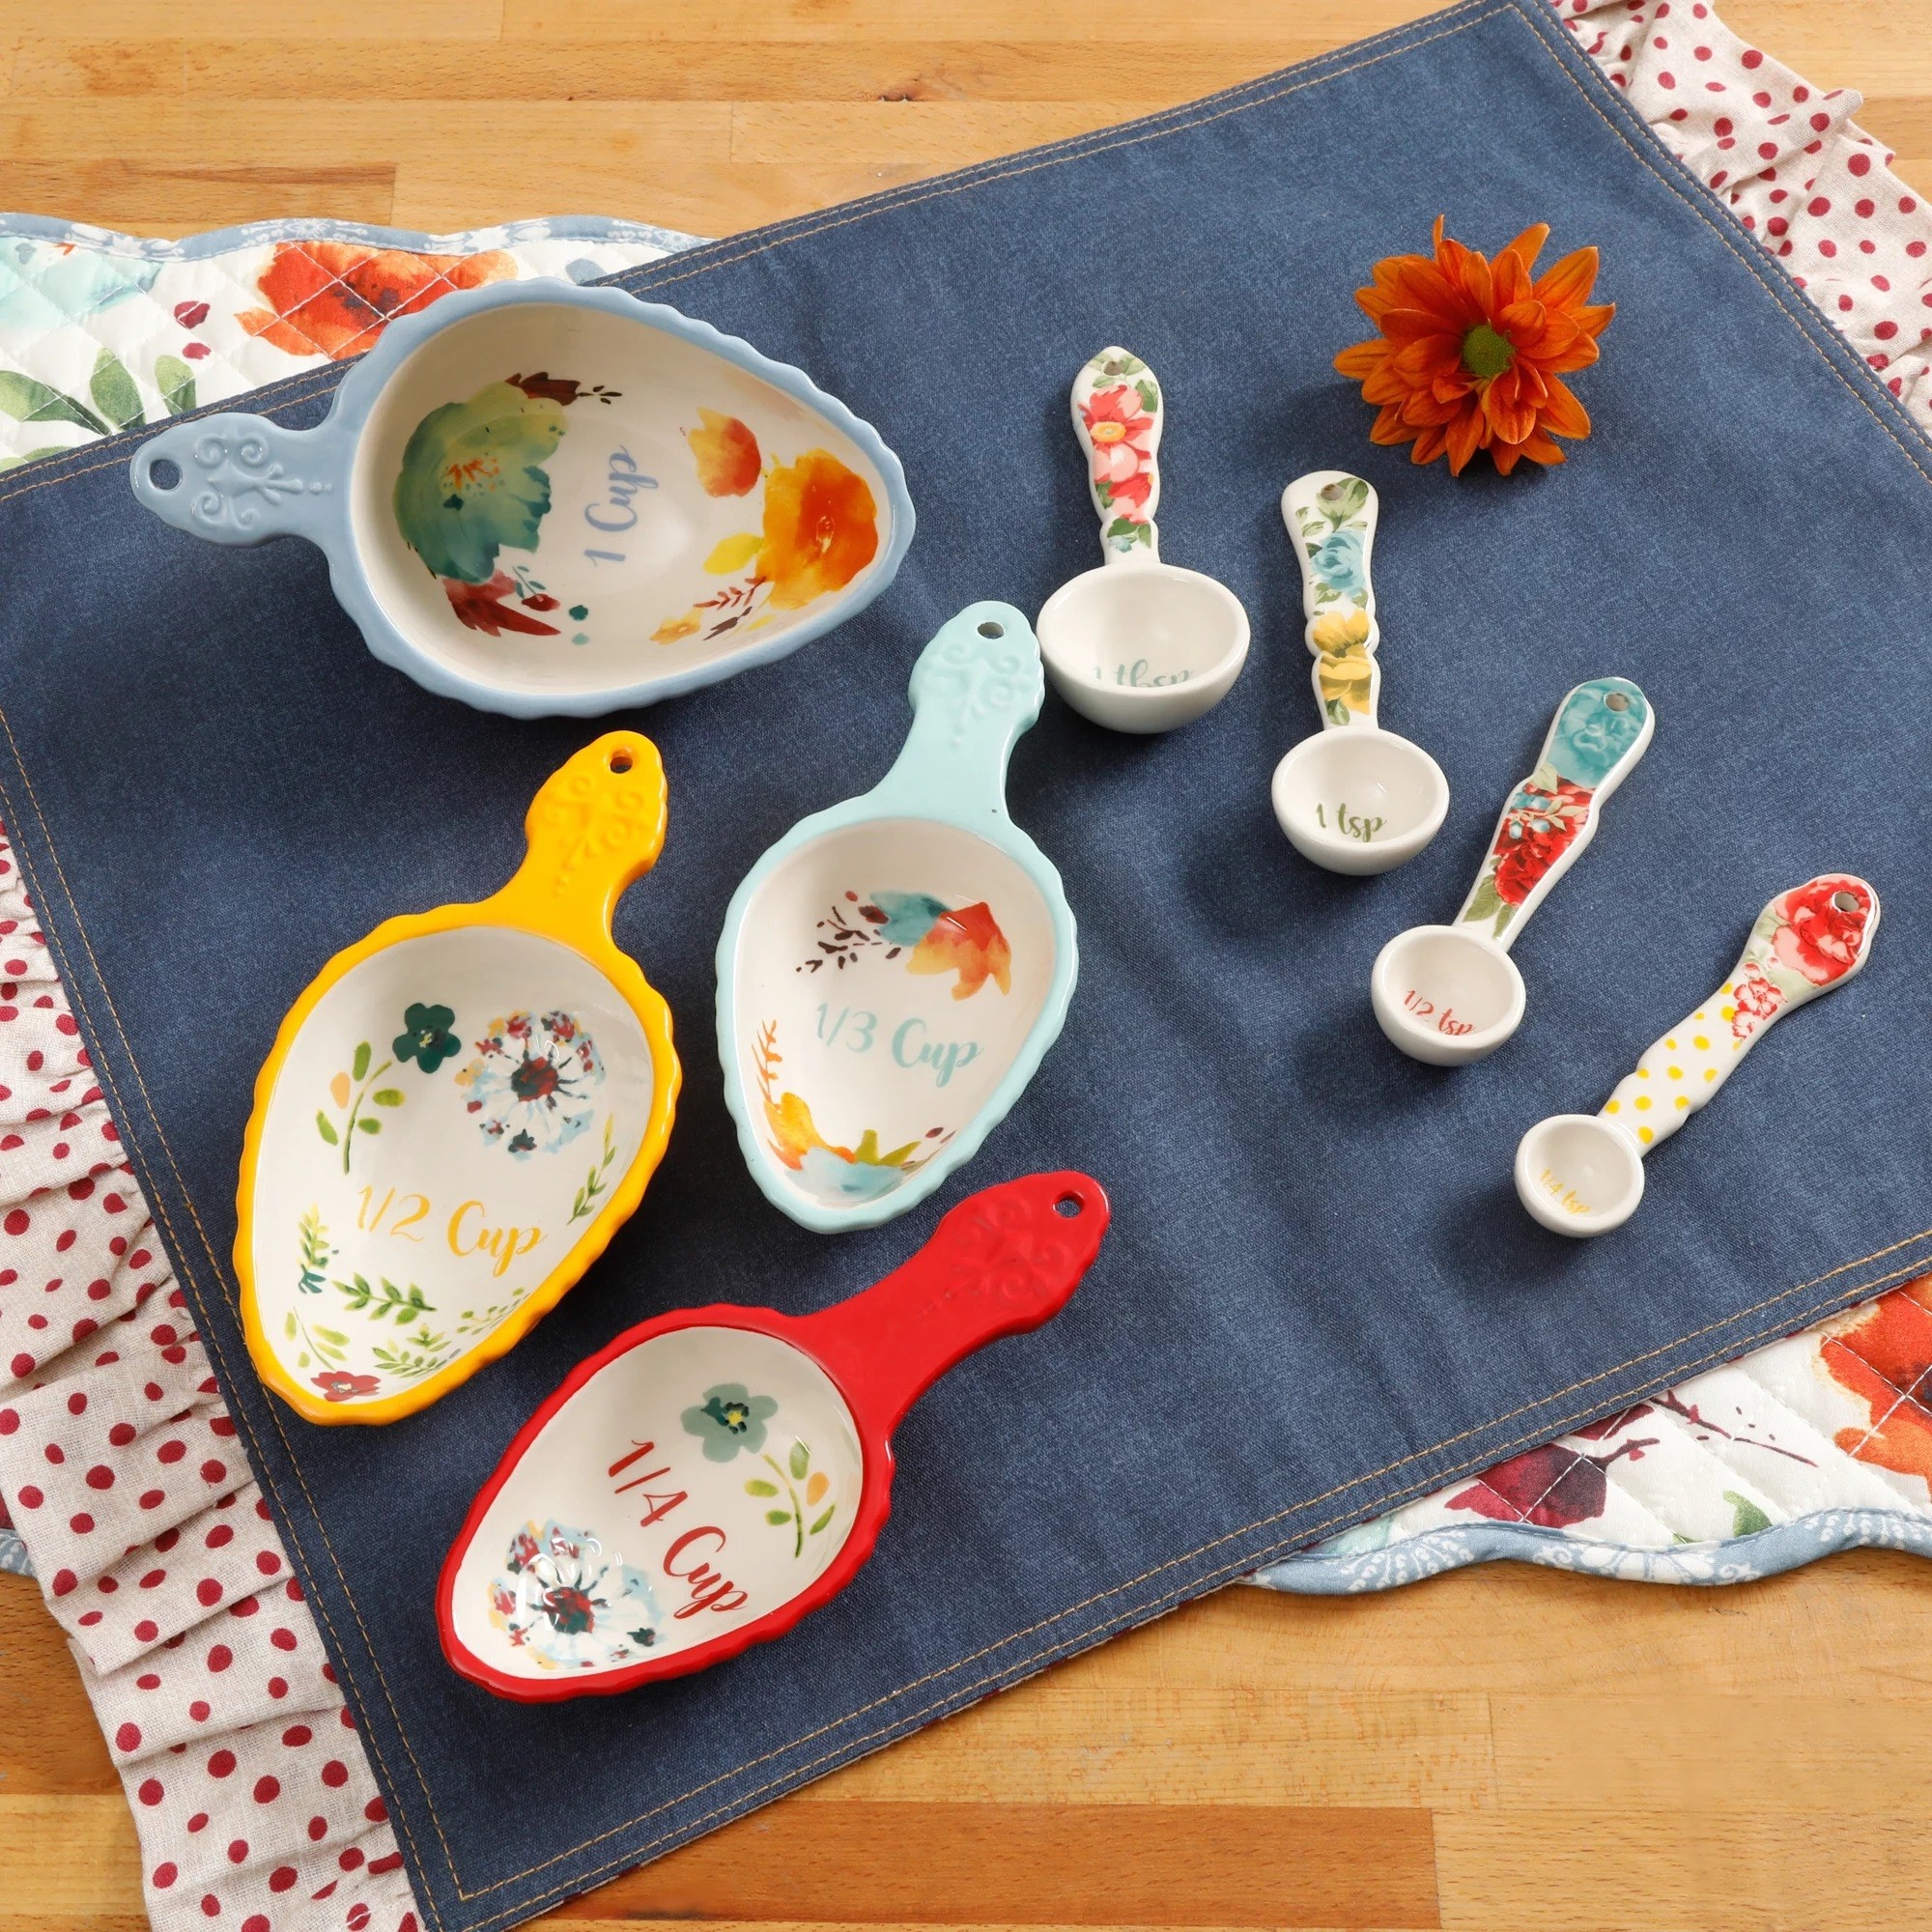 the colorful set of measuring spoons and cups